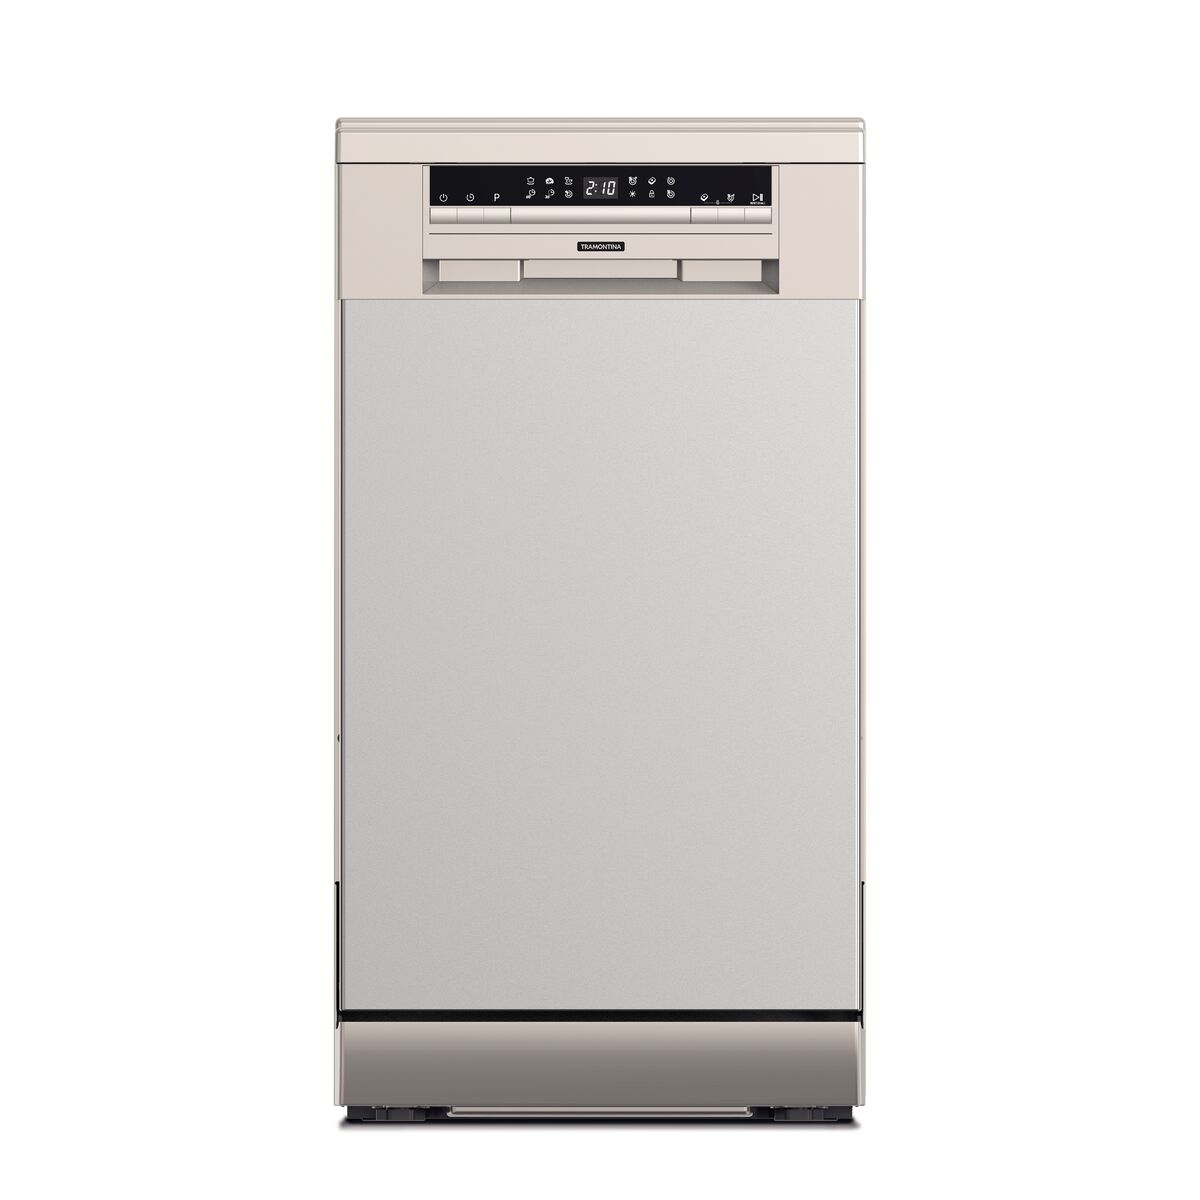 Tramontina Inox SB09X 45 stainless steel dishwasher with capacity for 9 standard place settings 220 V